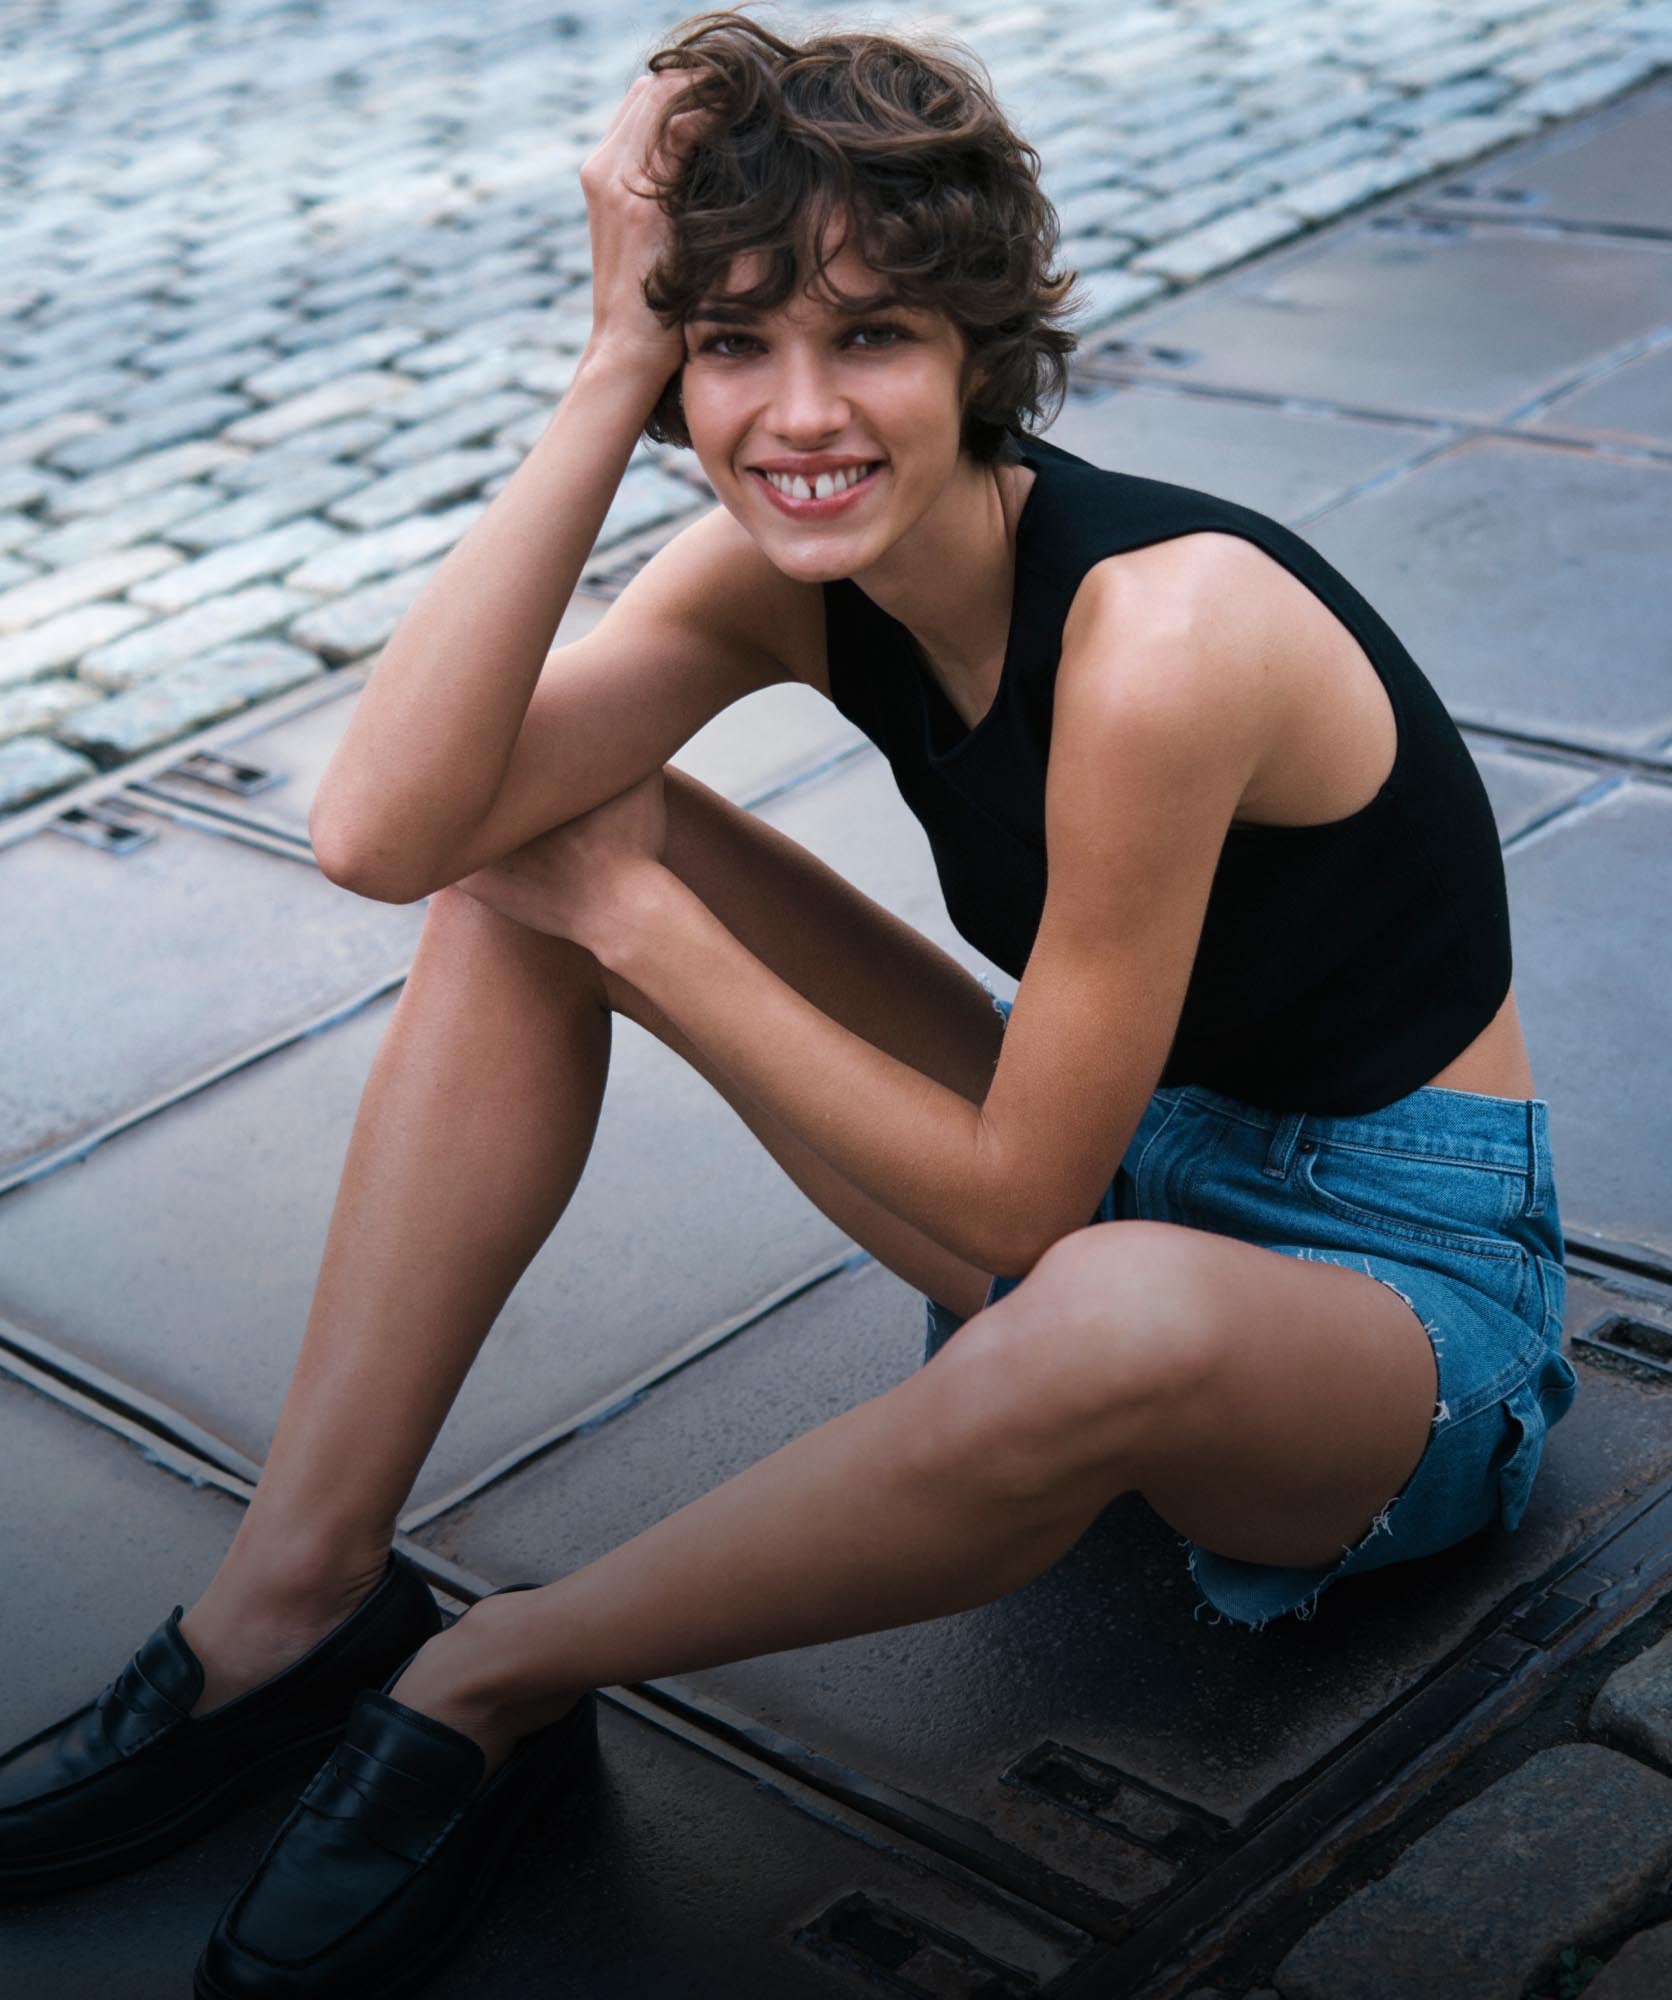 A model sitting on the ground posing with her hand in her hair wearing a black tank top and denim shorts 